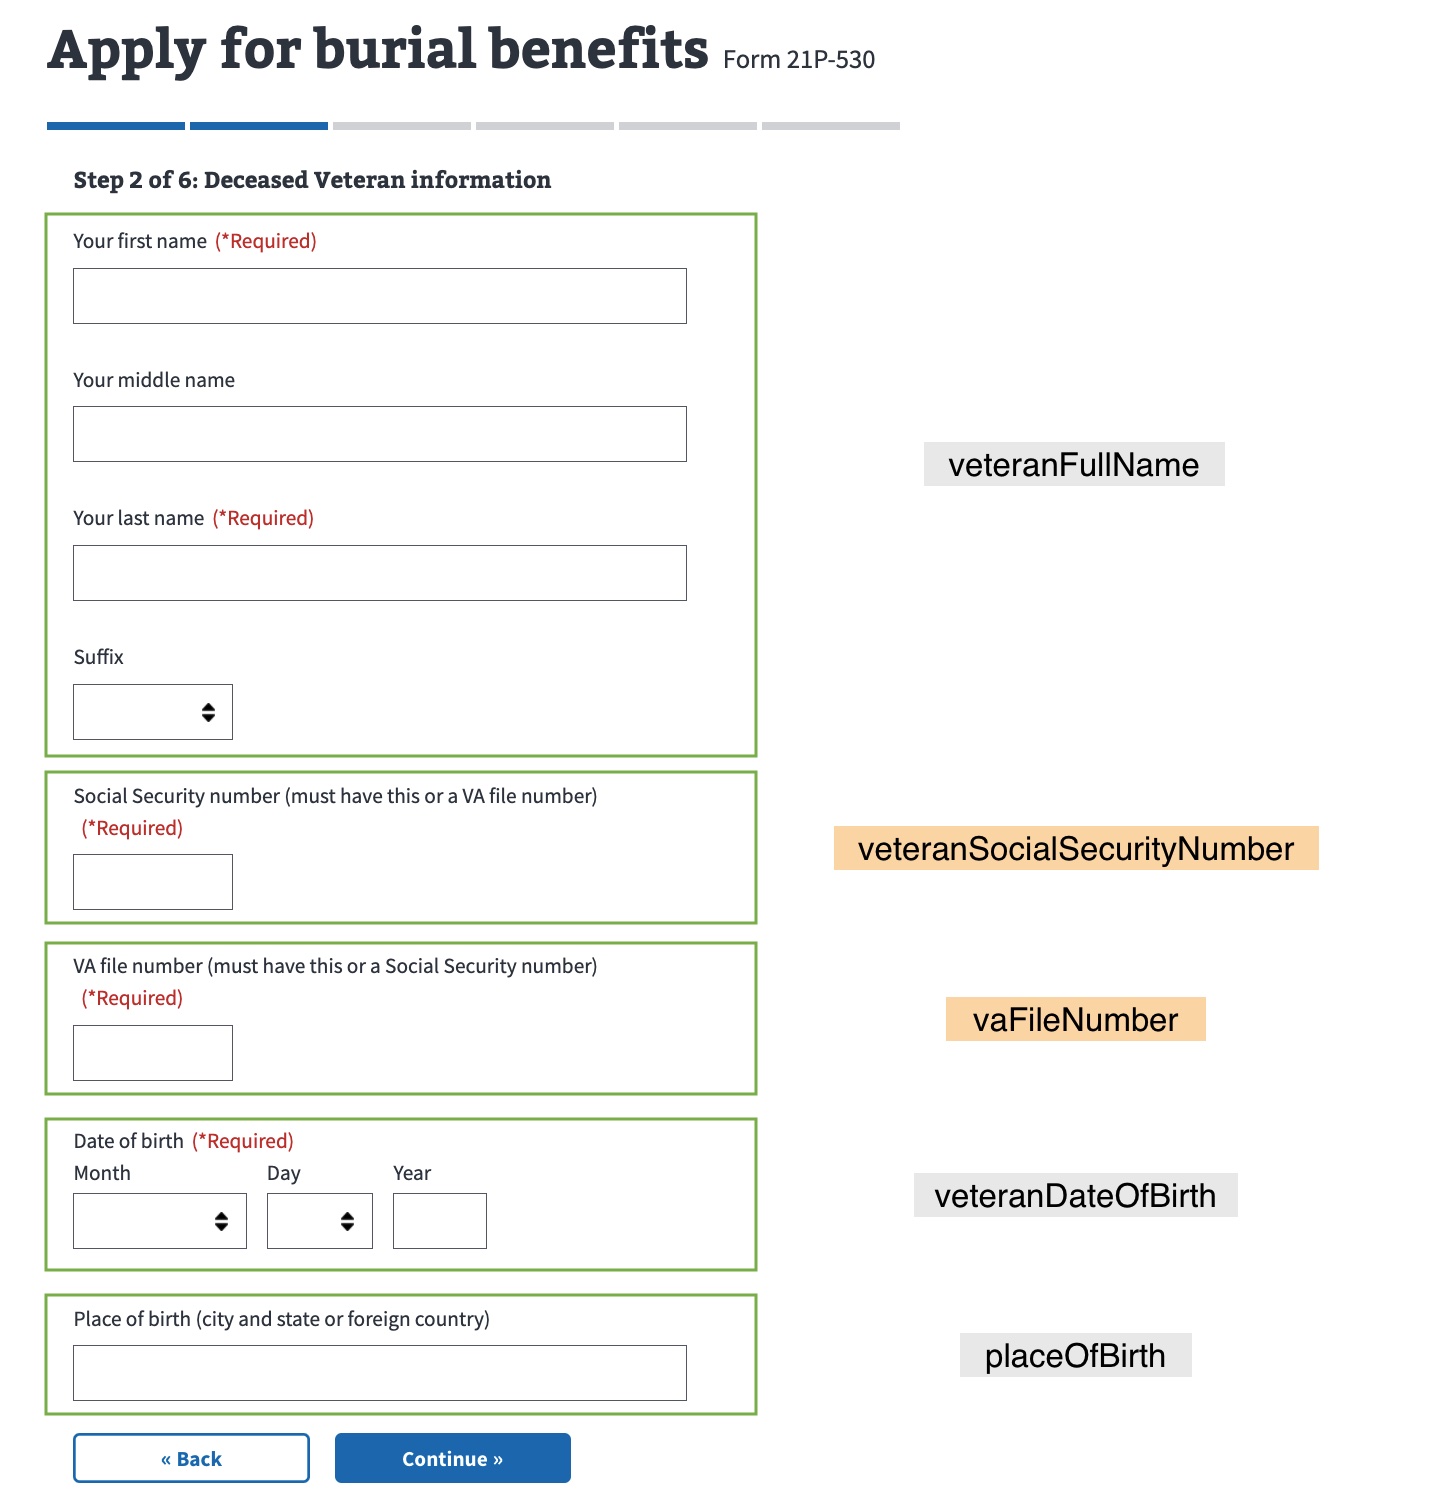 Screen shot showing the Deceased Veteran information page on the 21P-530 Form with UI fields annotated with the corresponding schema fields